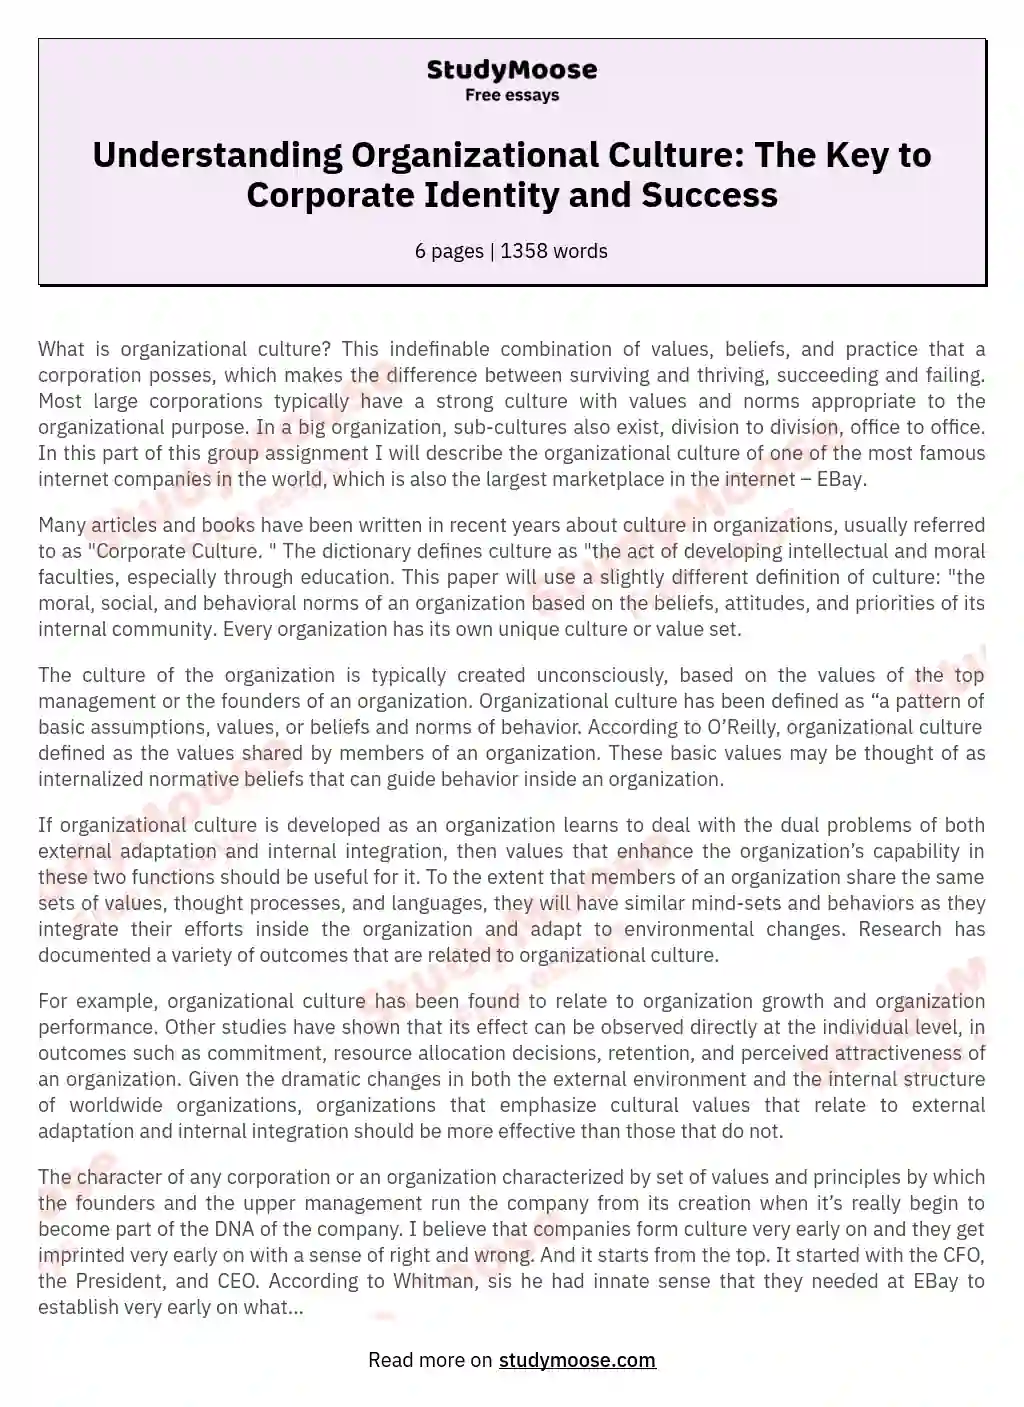 Understanding Organizational Culture: The Key to Corporate Identity and Success essay